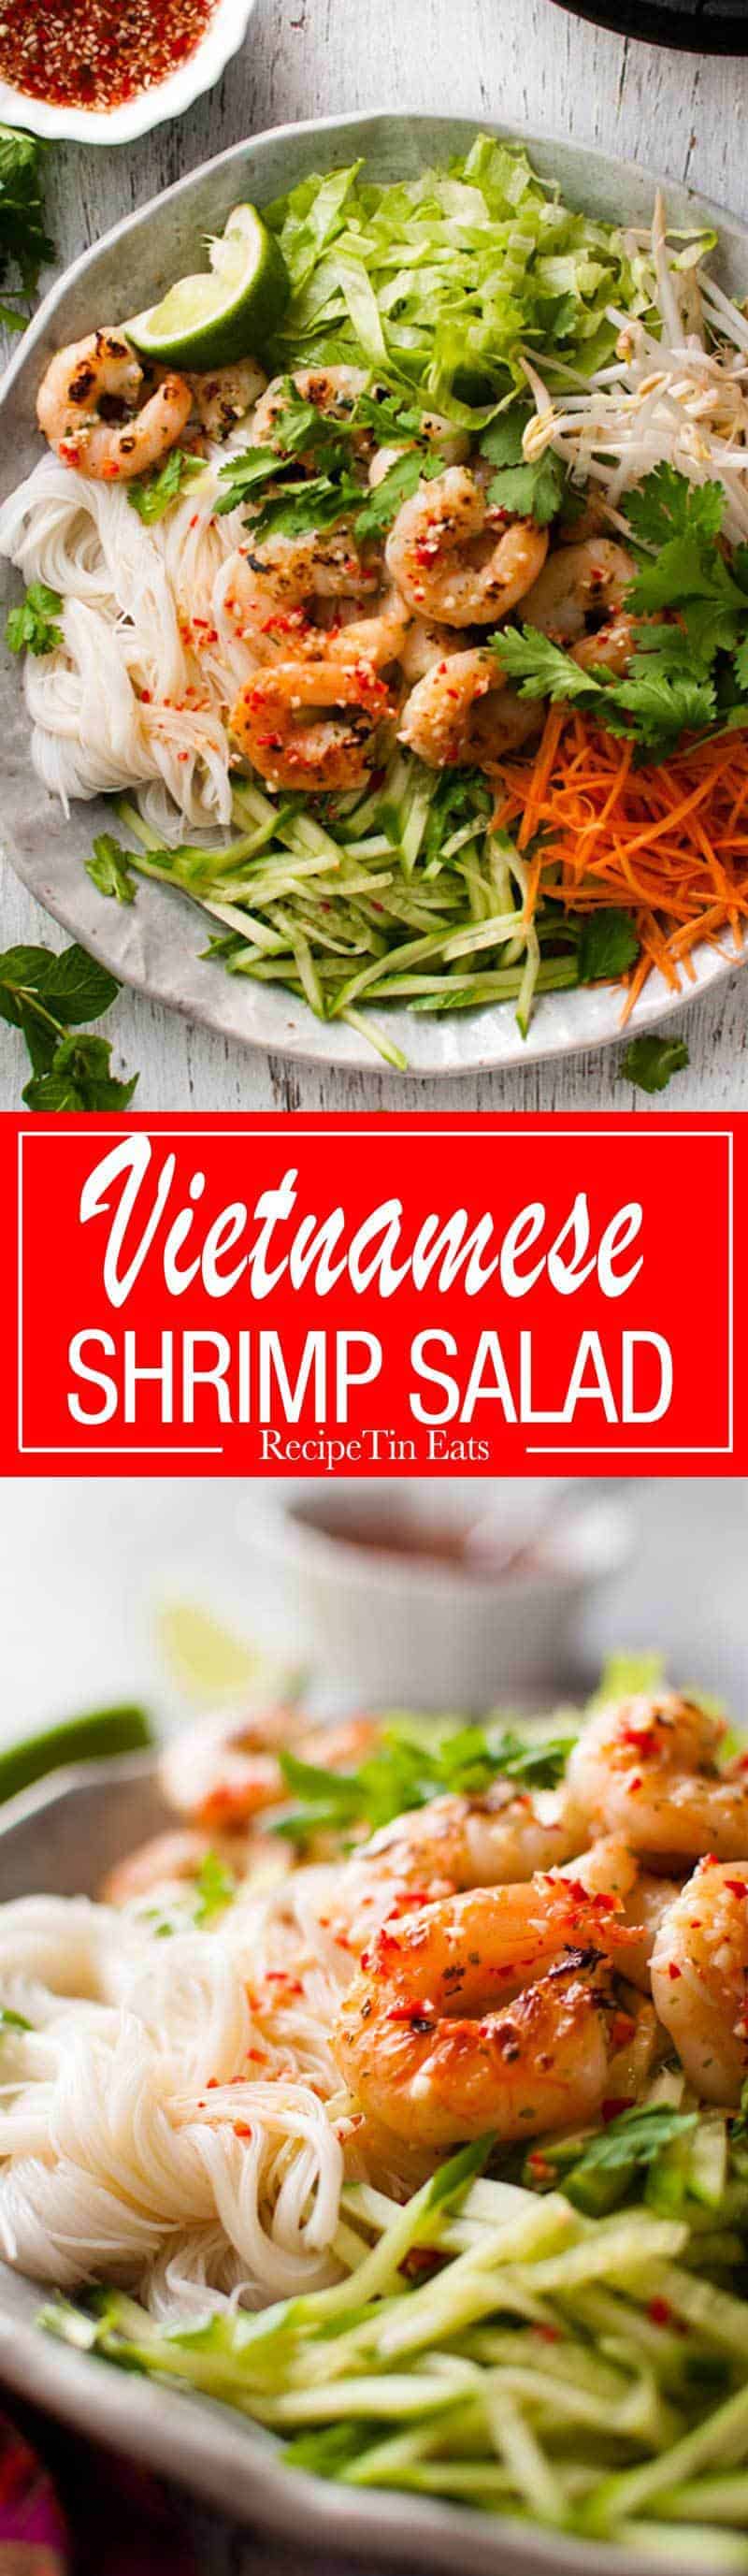 Vietnamese Shrimp Noodle Salad - lovely bright, zesty flavours, incredibly healthy, fast to make and an awesome dressing. recipetineats.com